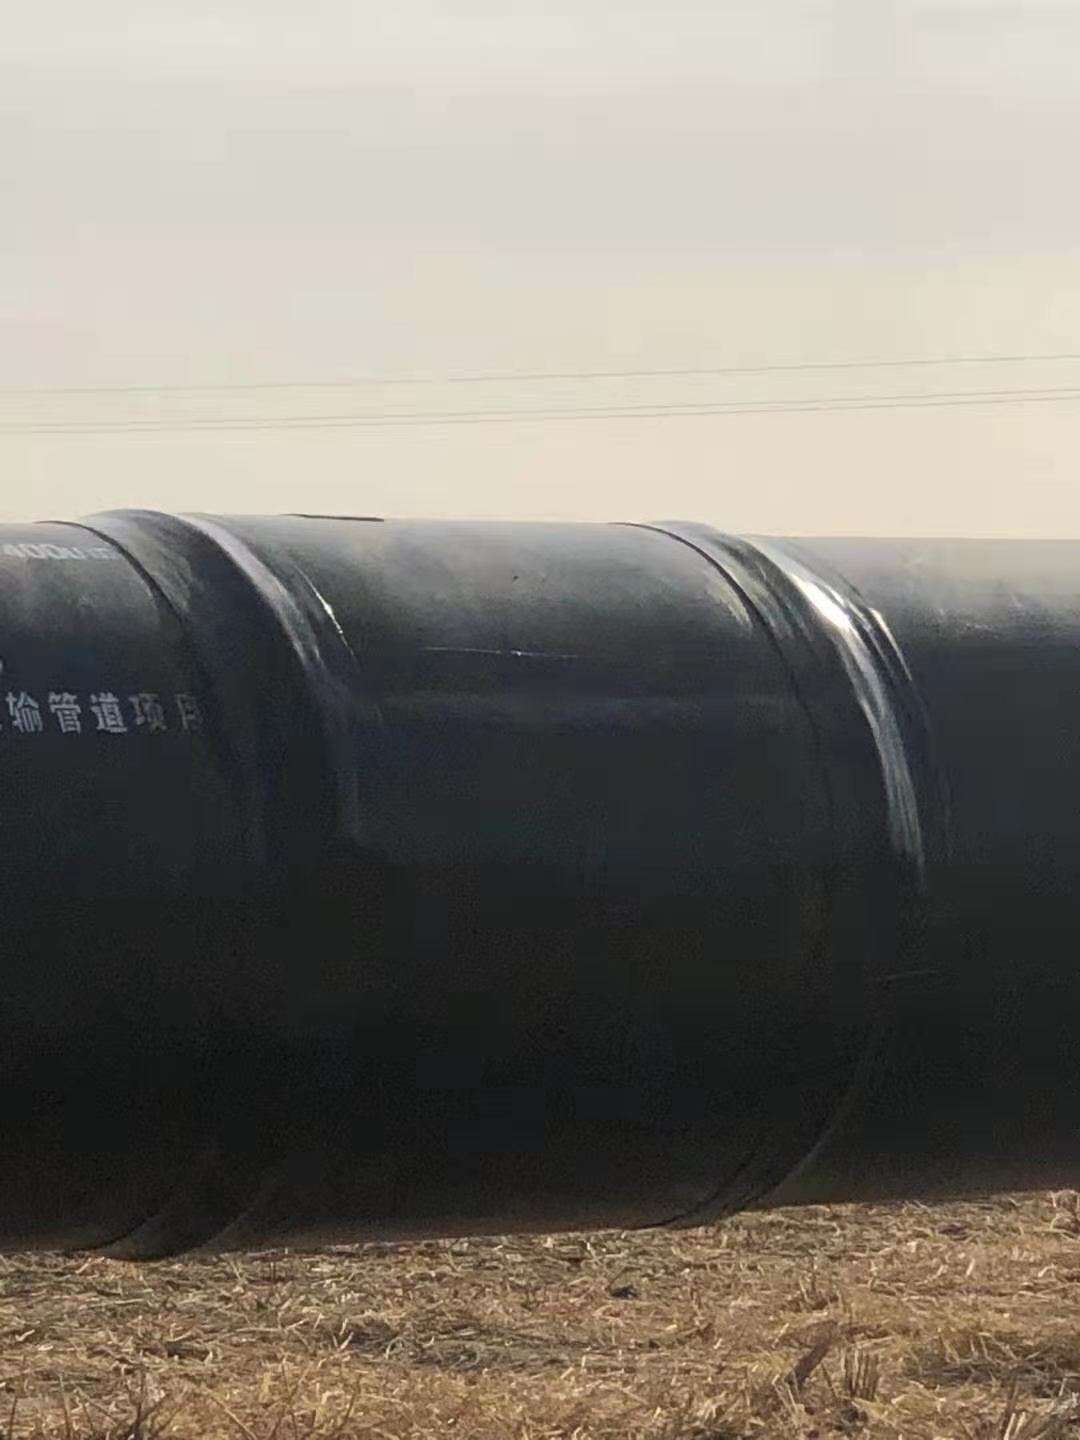 Jinlian Oil Pipeline heat insulation project in Liaoning Province China